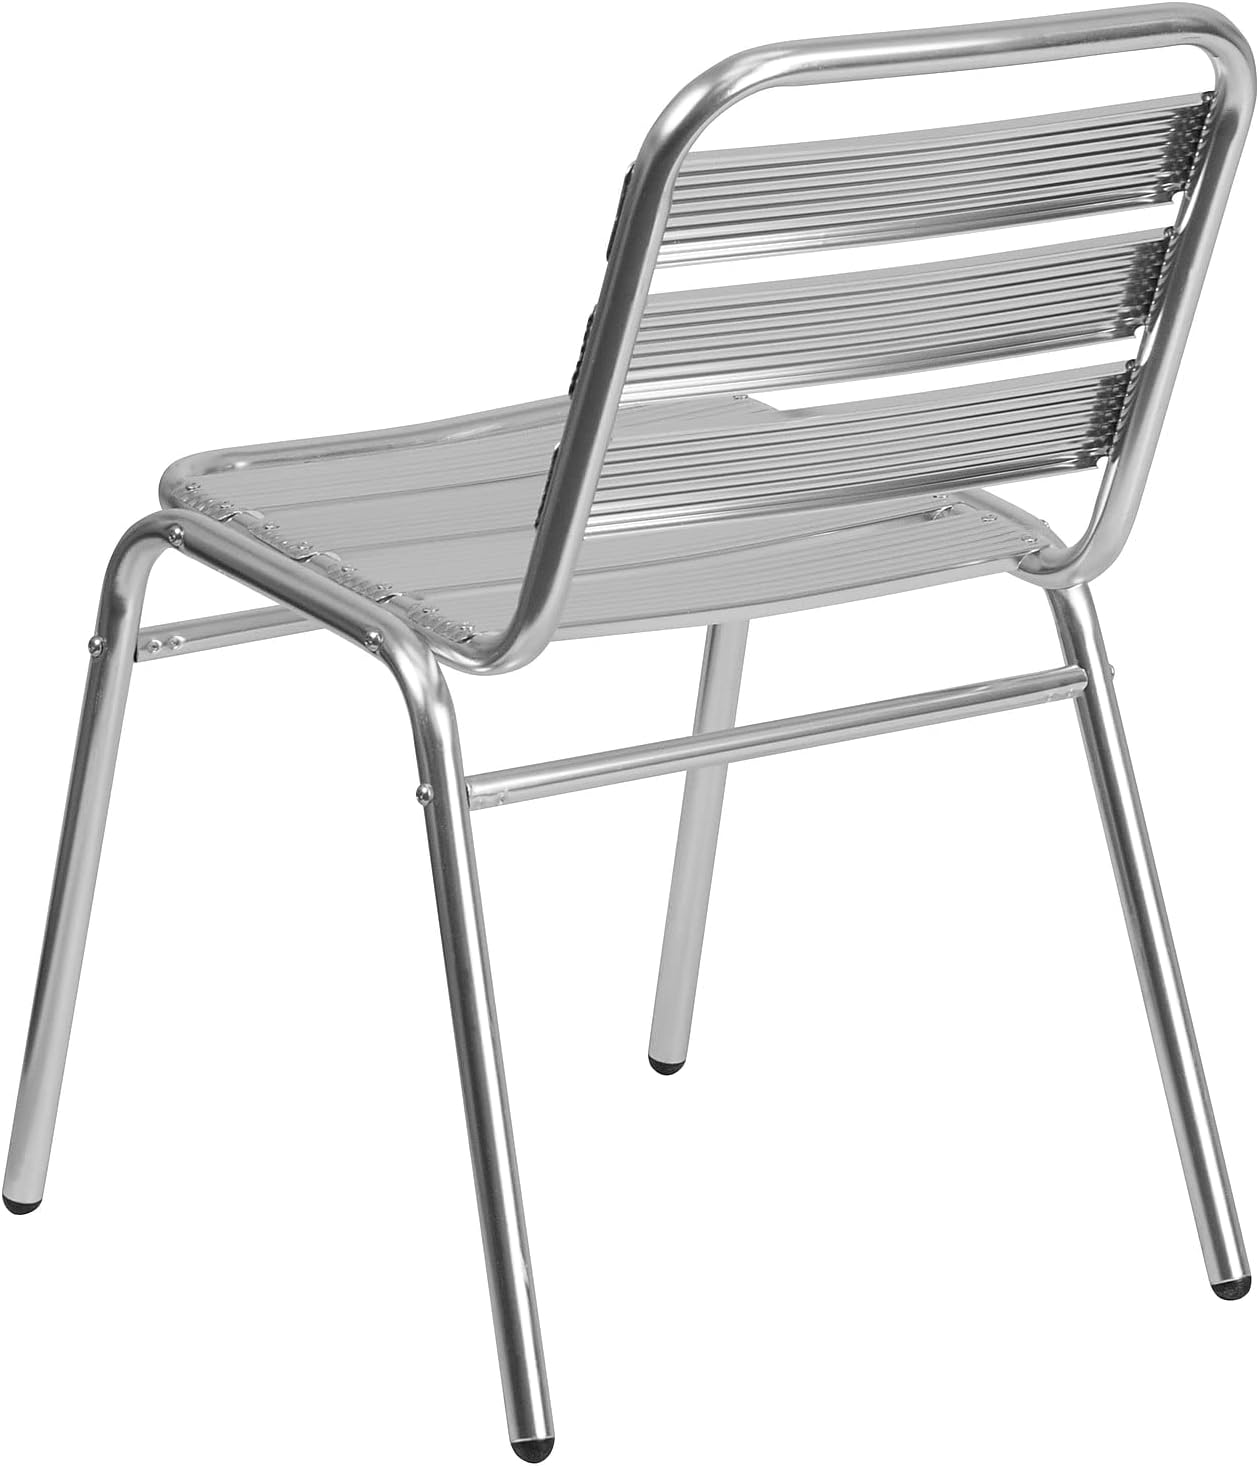 Lila Commercial Aluminum Indoor-Outdoor Restaurant Stack Chair with Triple Slat Back